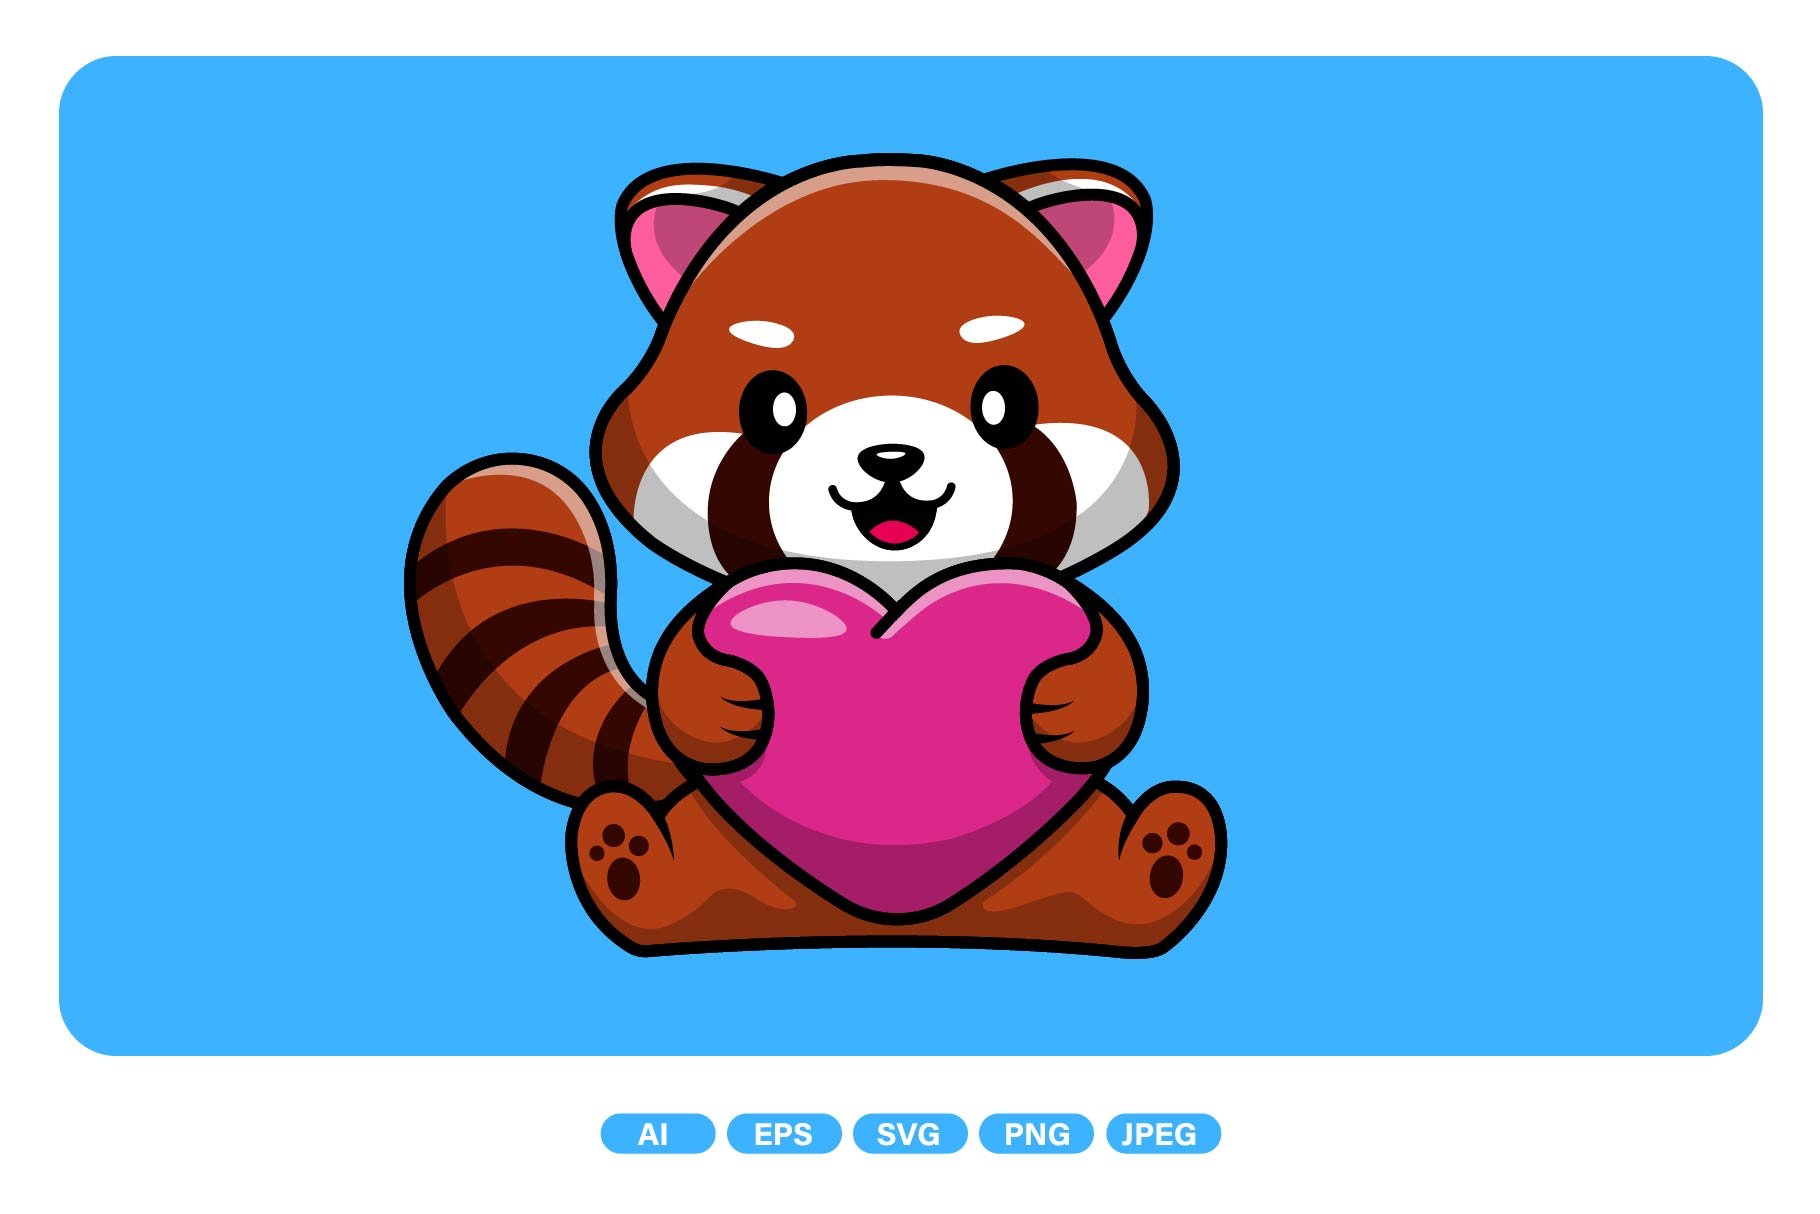 Cute Red Panda Holding Heart Love cover image.